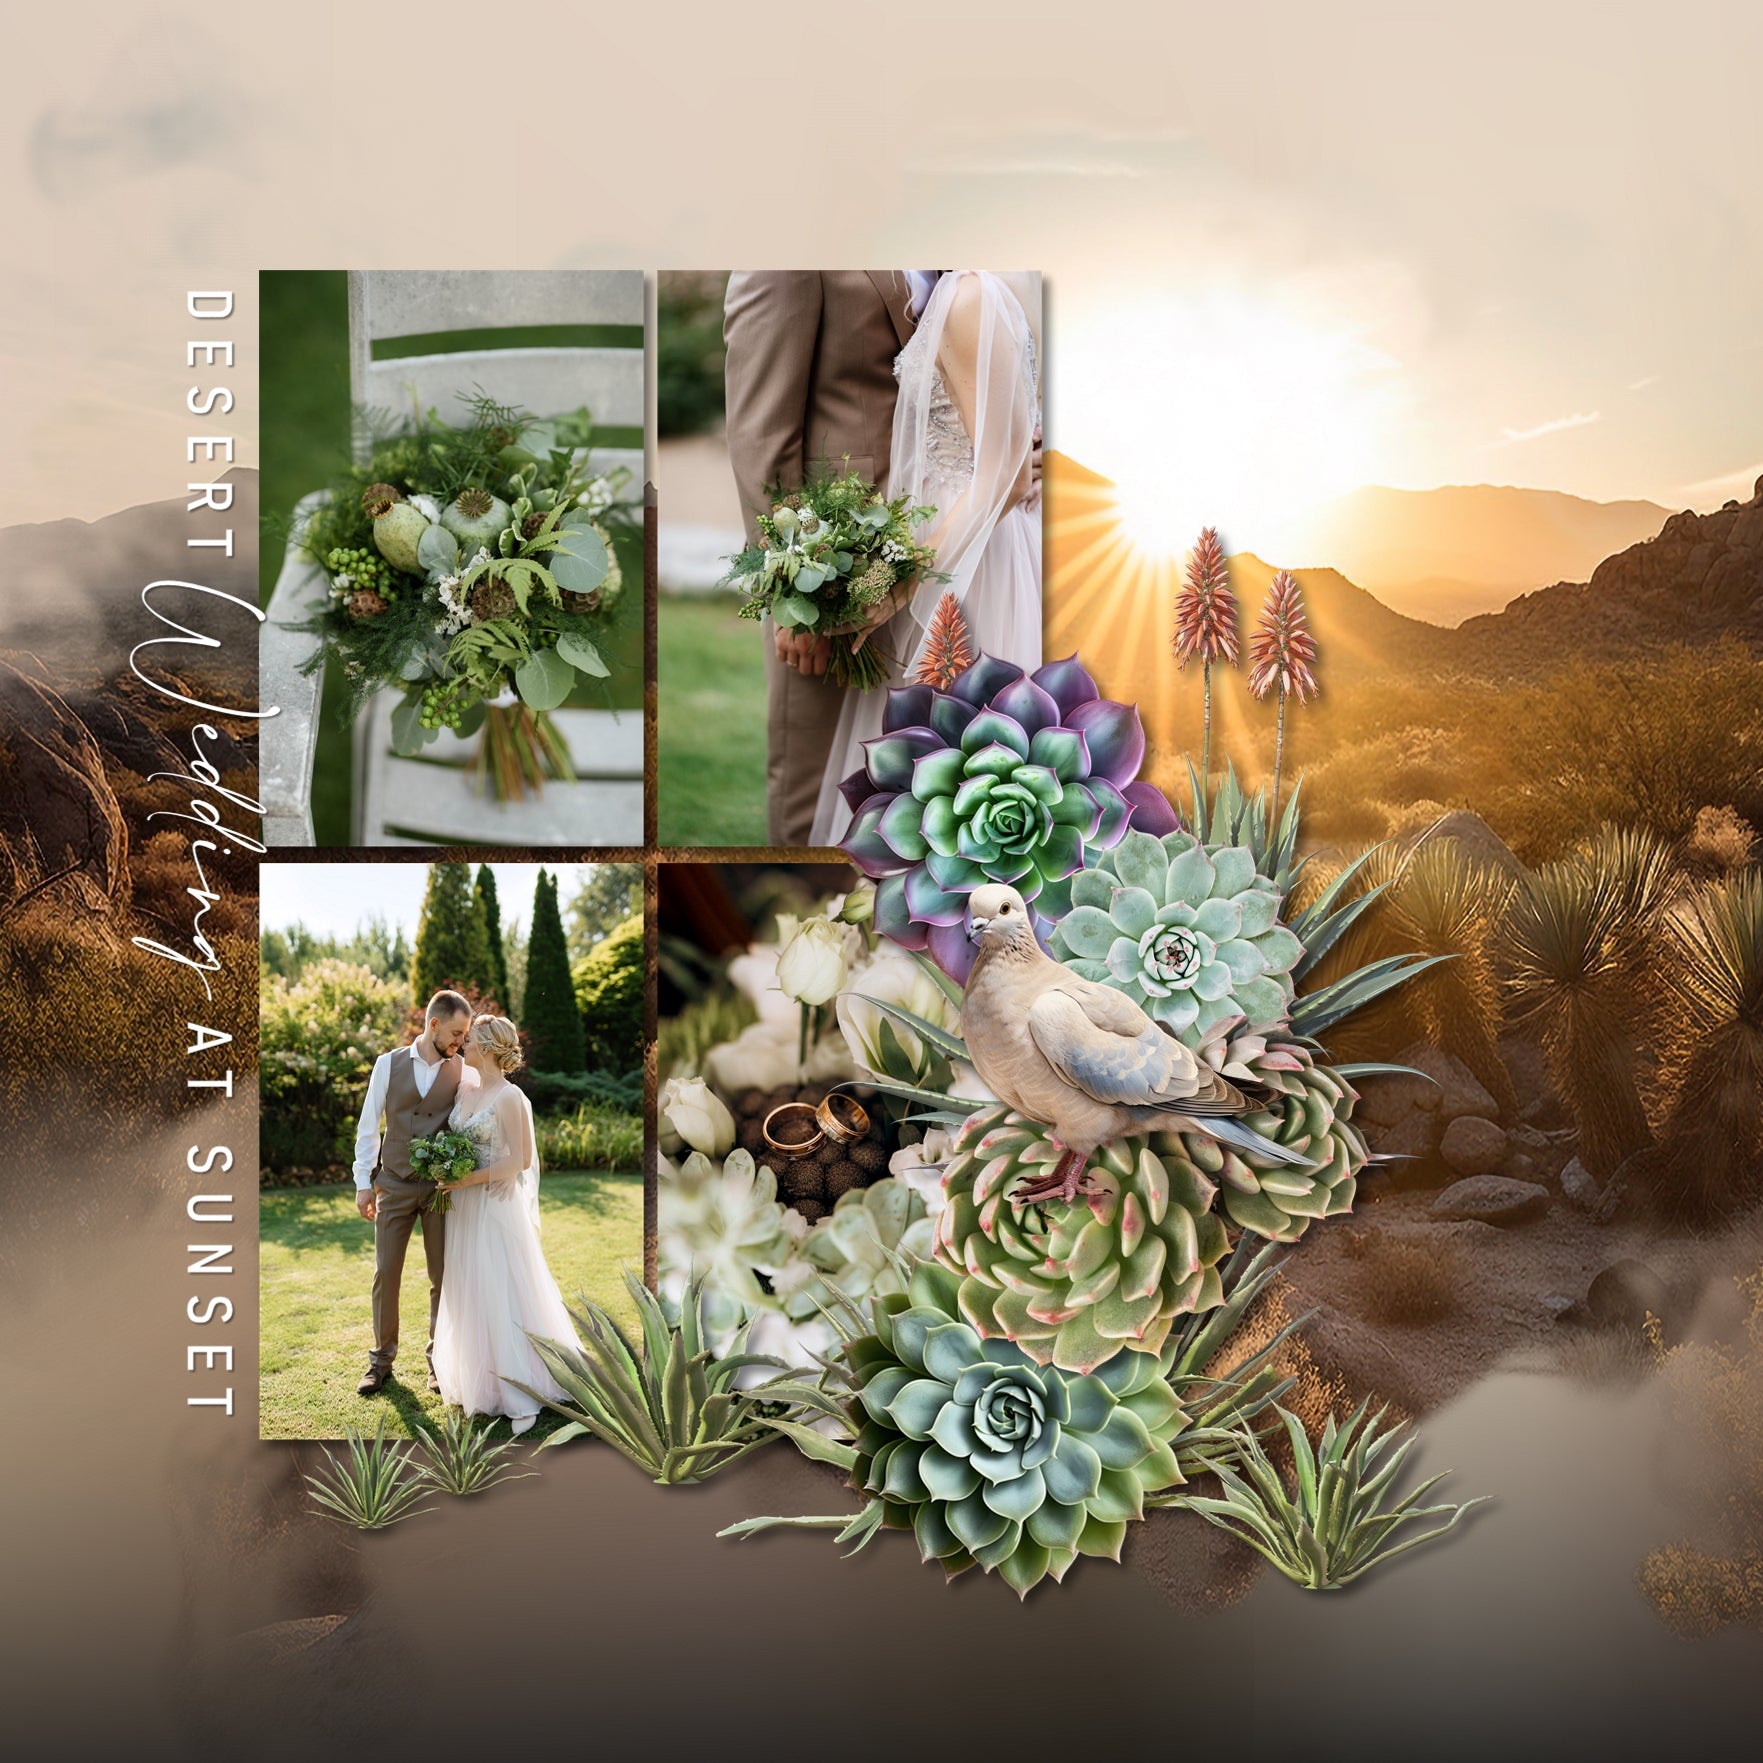 Explore nature and the outdoors with these beautiful digital scrapbooking desert embellishments, papers, masked photo overlays, and cactus alpha set by Lucky Girl Creative digital art. Great for desert, the Southwest, Mexico, California, Arizona, Texas, Colorado, New Mexico, Utah, Wyoming, and more! Embellishments include armadillo, big horn sheep, ram, dove, hawk, quail, vulture, buzzard, camel, cougar, mountain lion, wolf, and more.